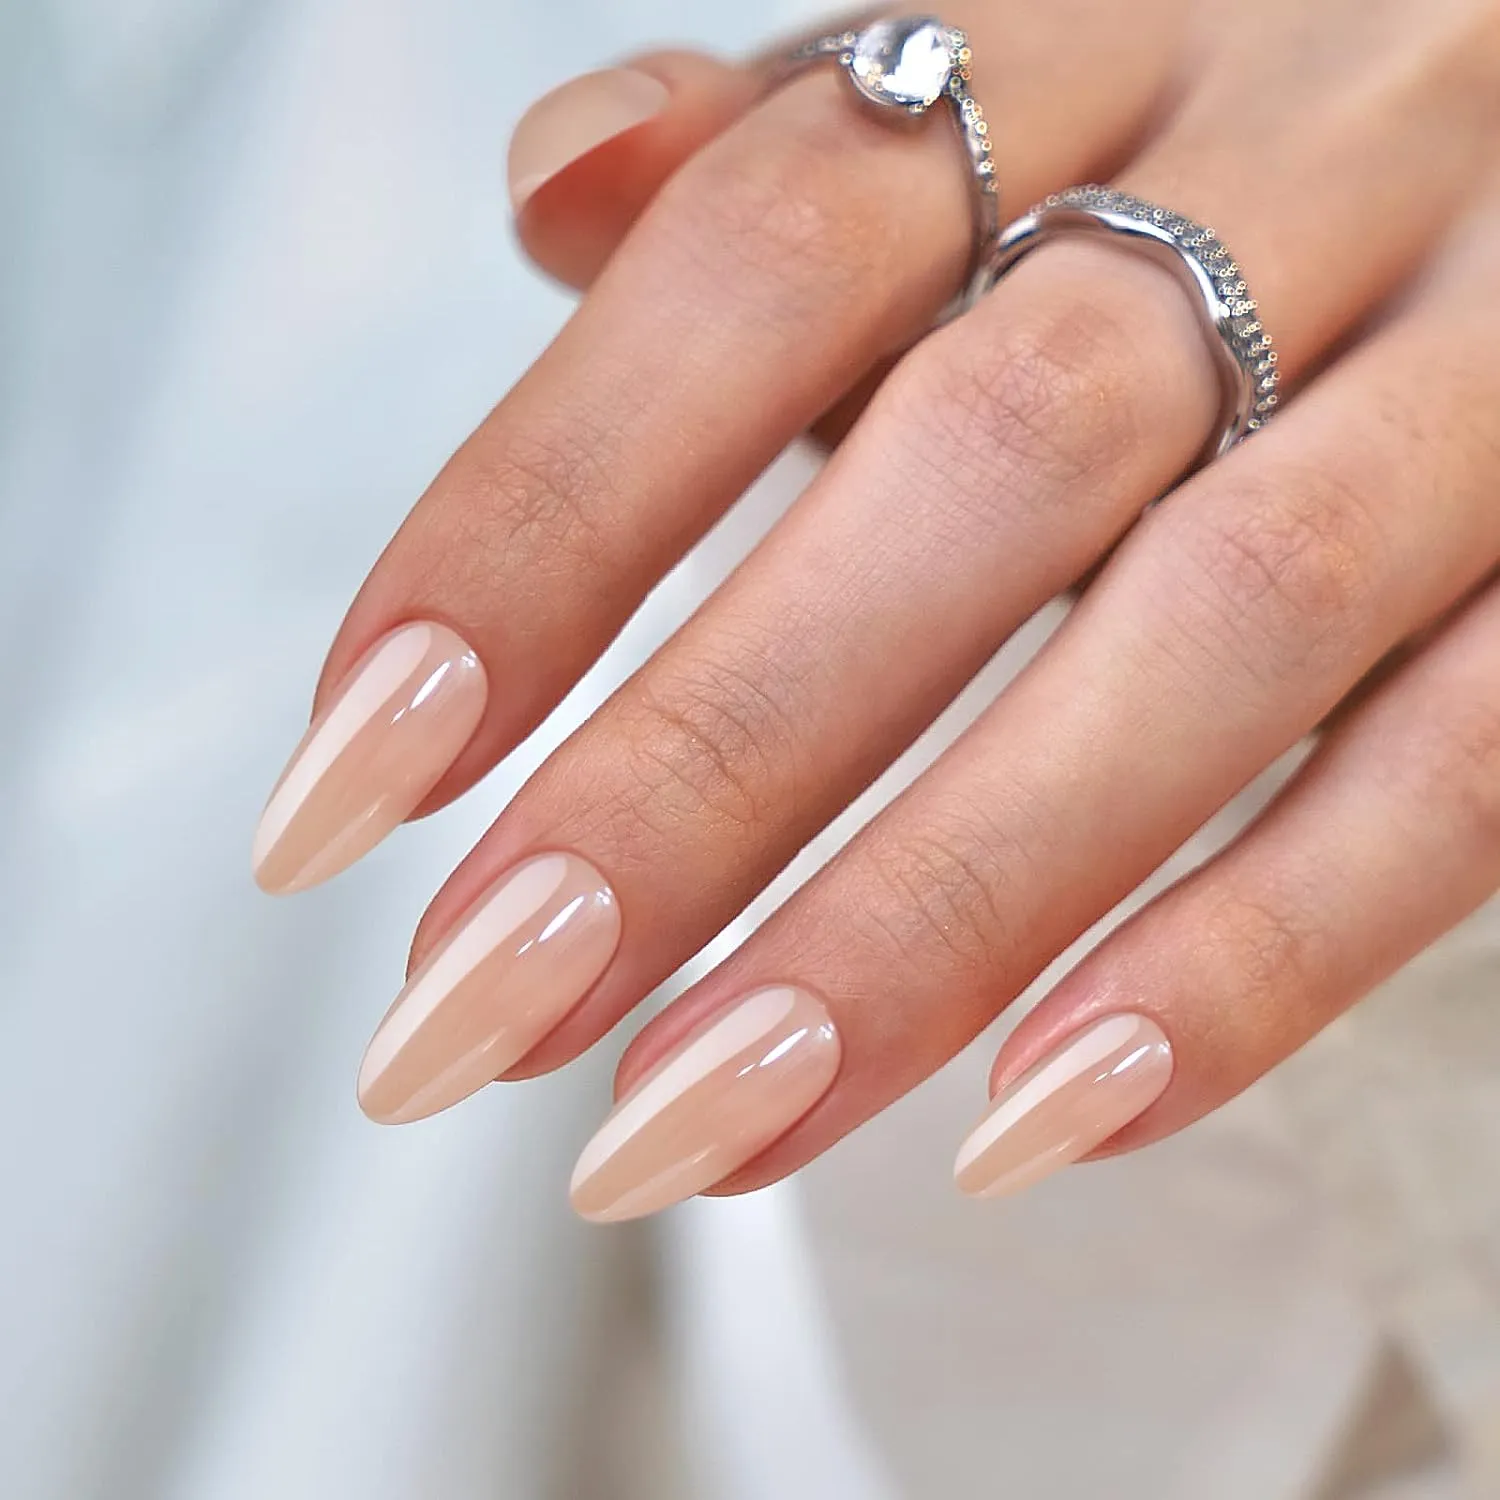 10 Popular Fall Nail Colors for 2019 - An Unblurred Lady | Almond nails  designs, Nails, Almond acrylic nails